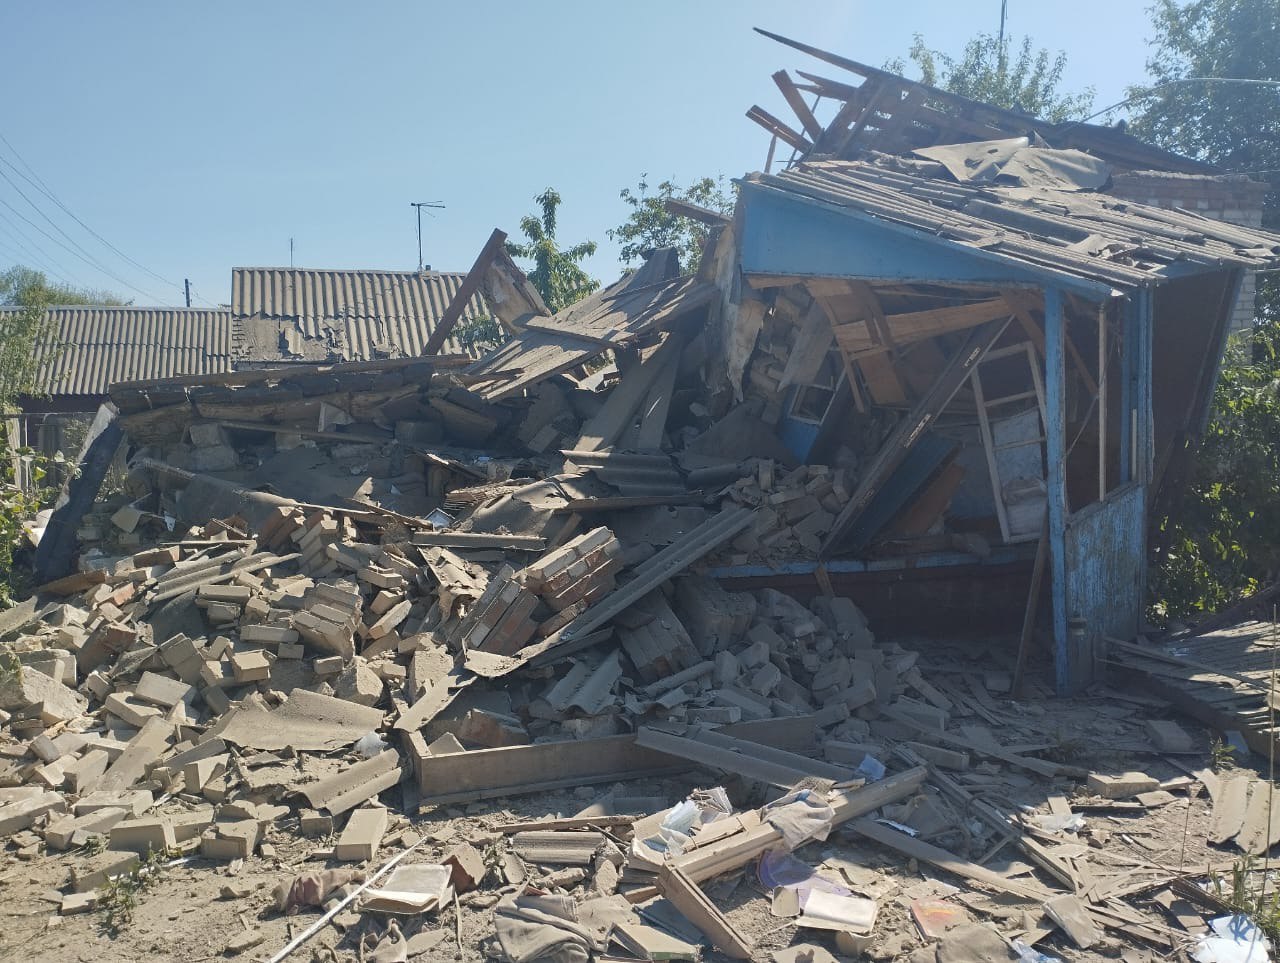 A house in Petrovske in Kharkiv Oblast, destroyed by Russian shelling / Photo: Kharkiv region's administration